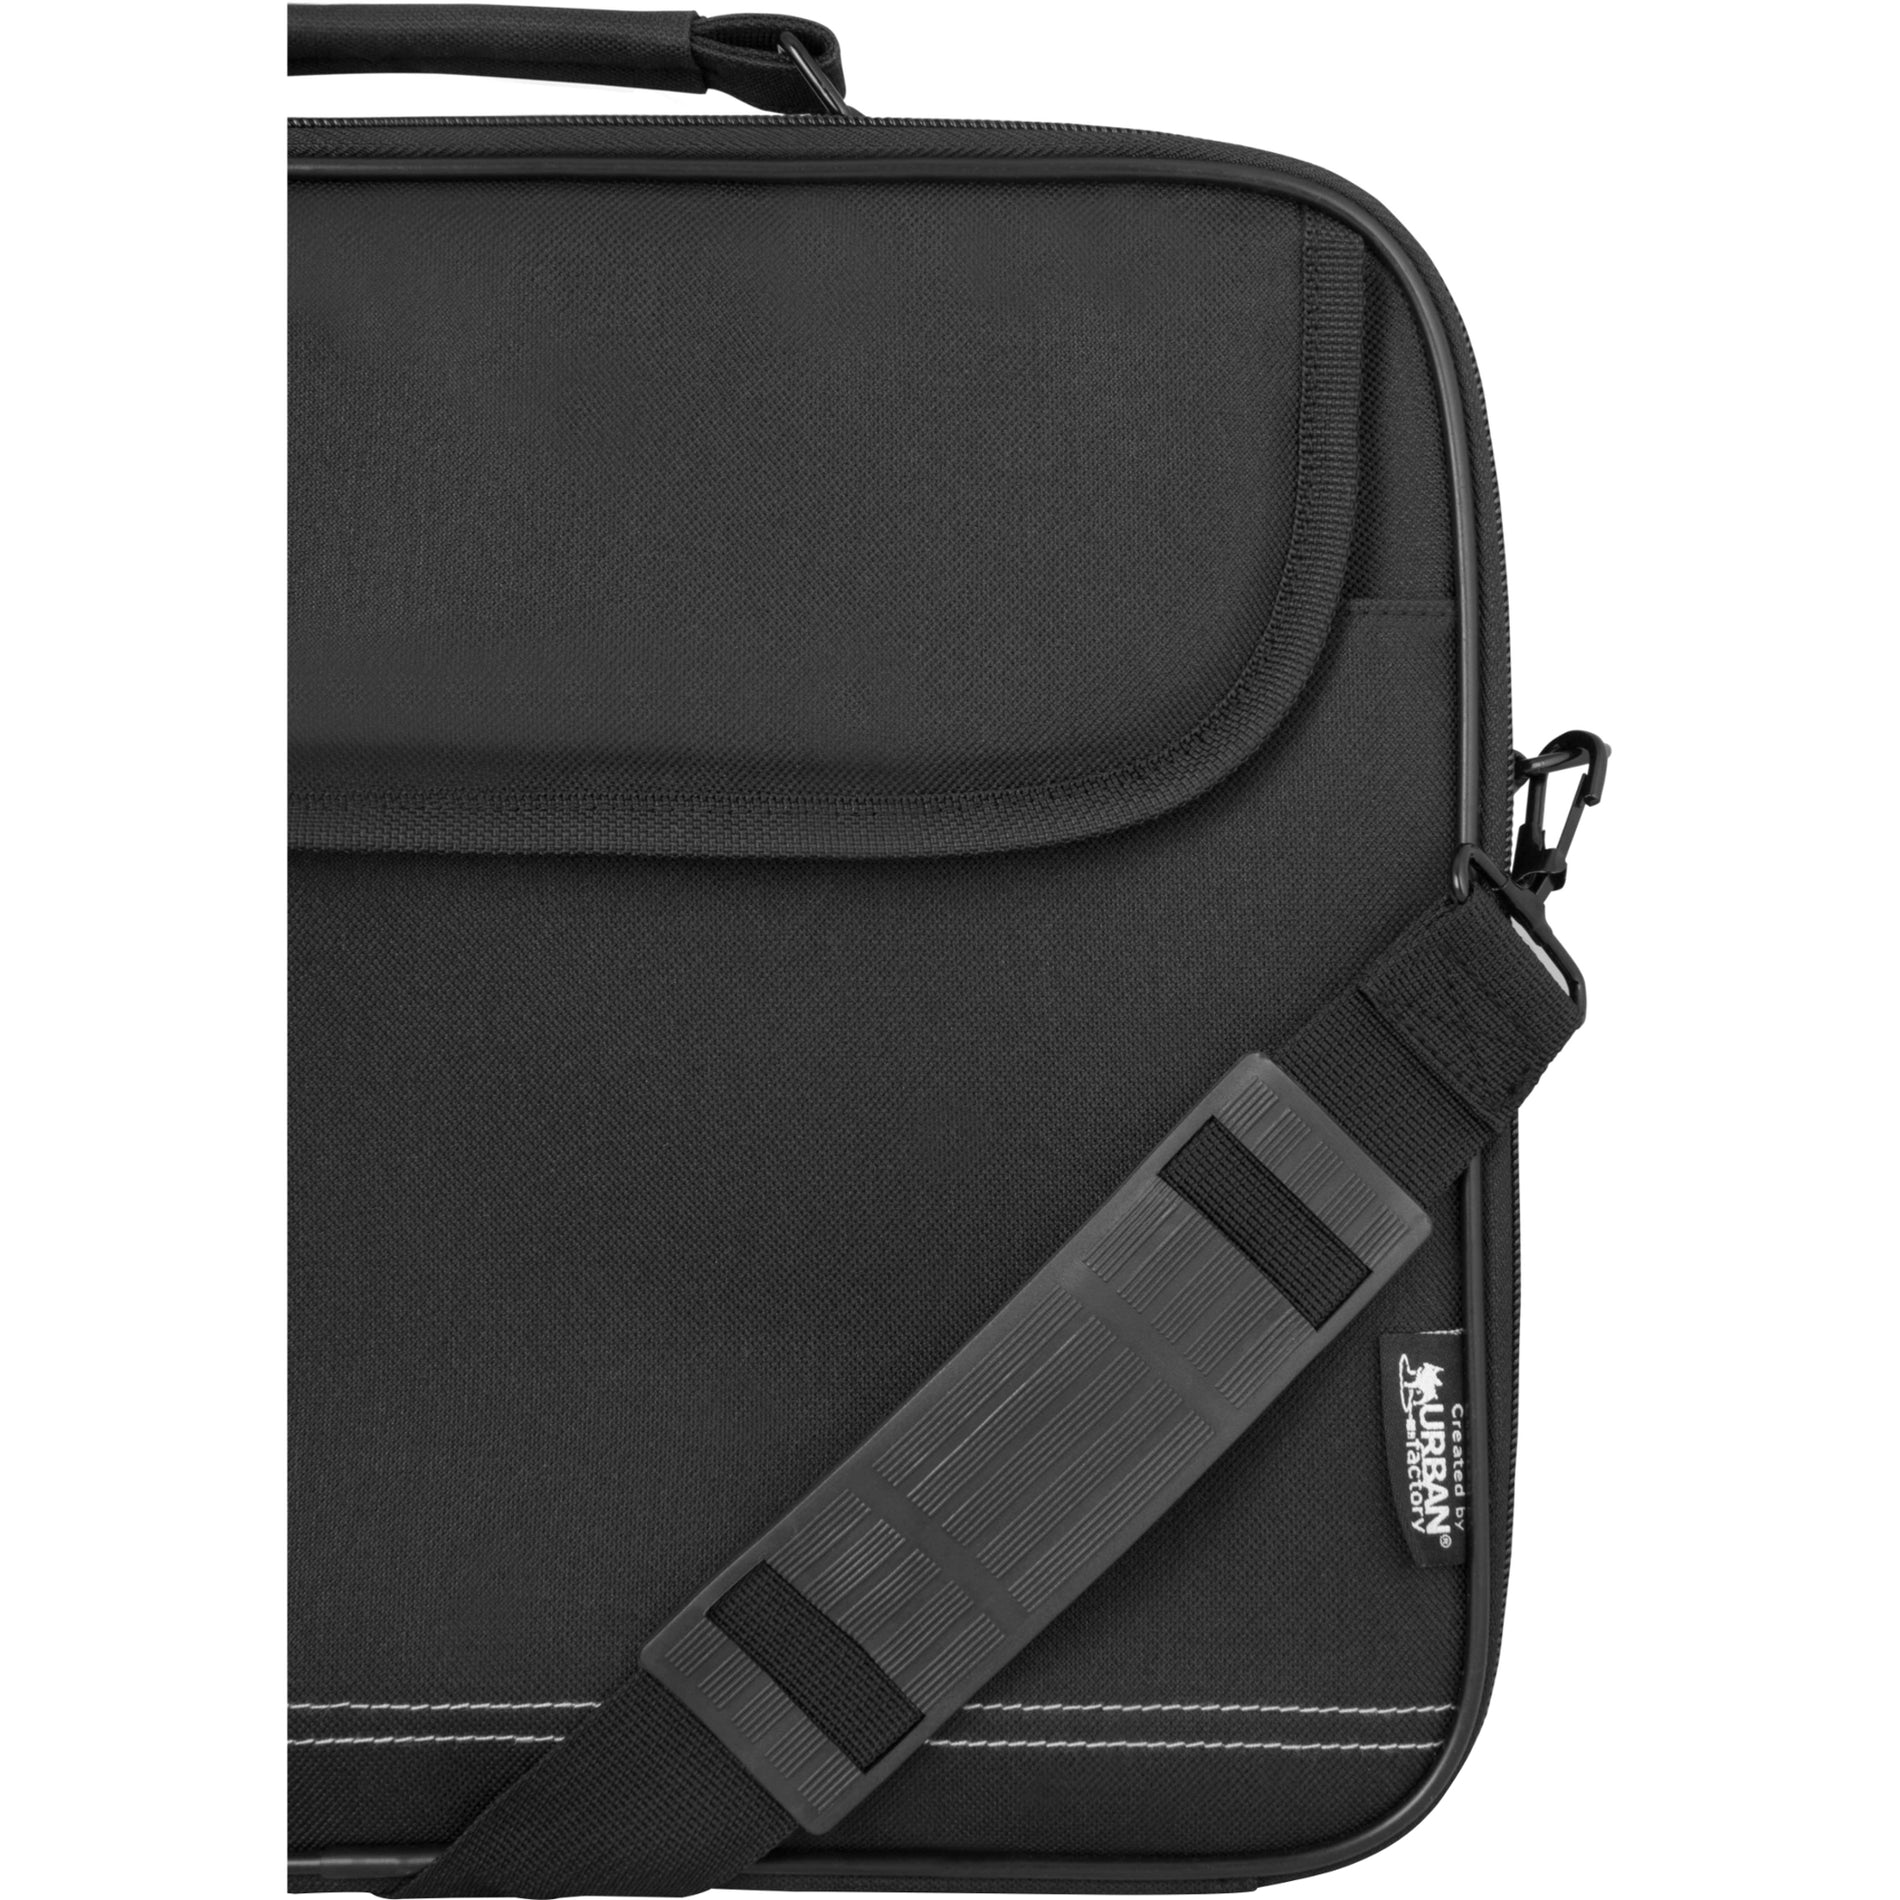 Urban Factory AVB06UF-V2 Laptop Clamshell Case 15.6", Compact and Water Resistant